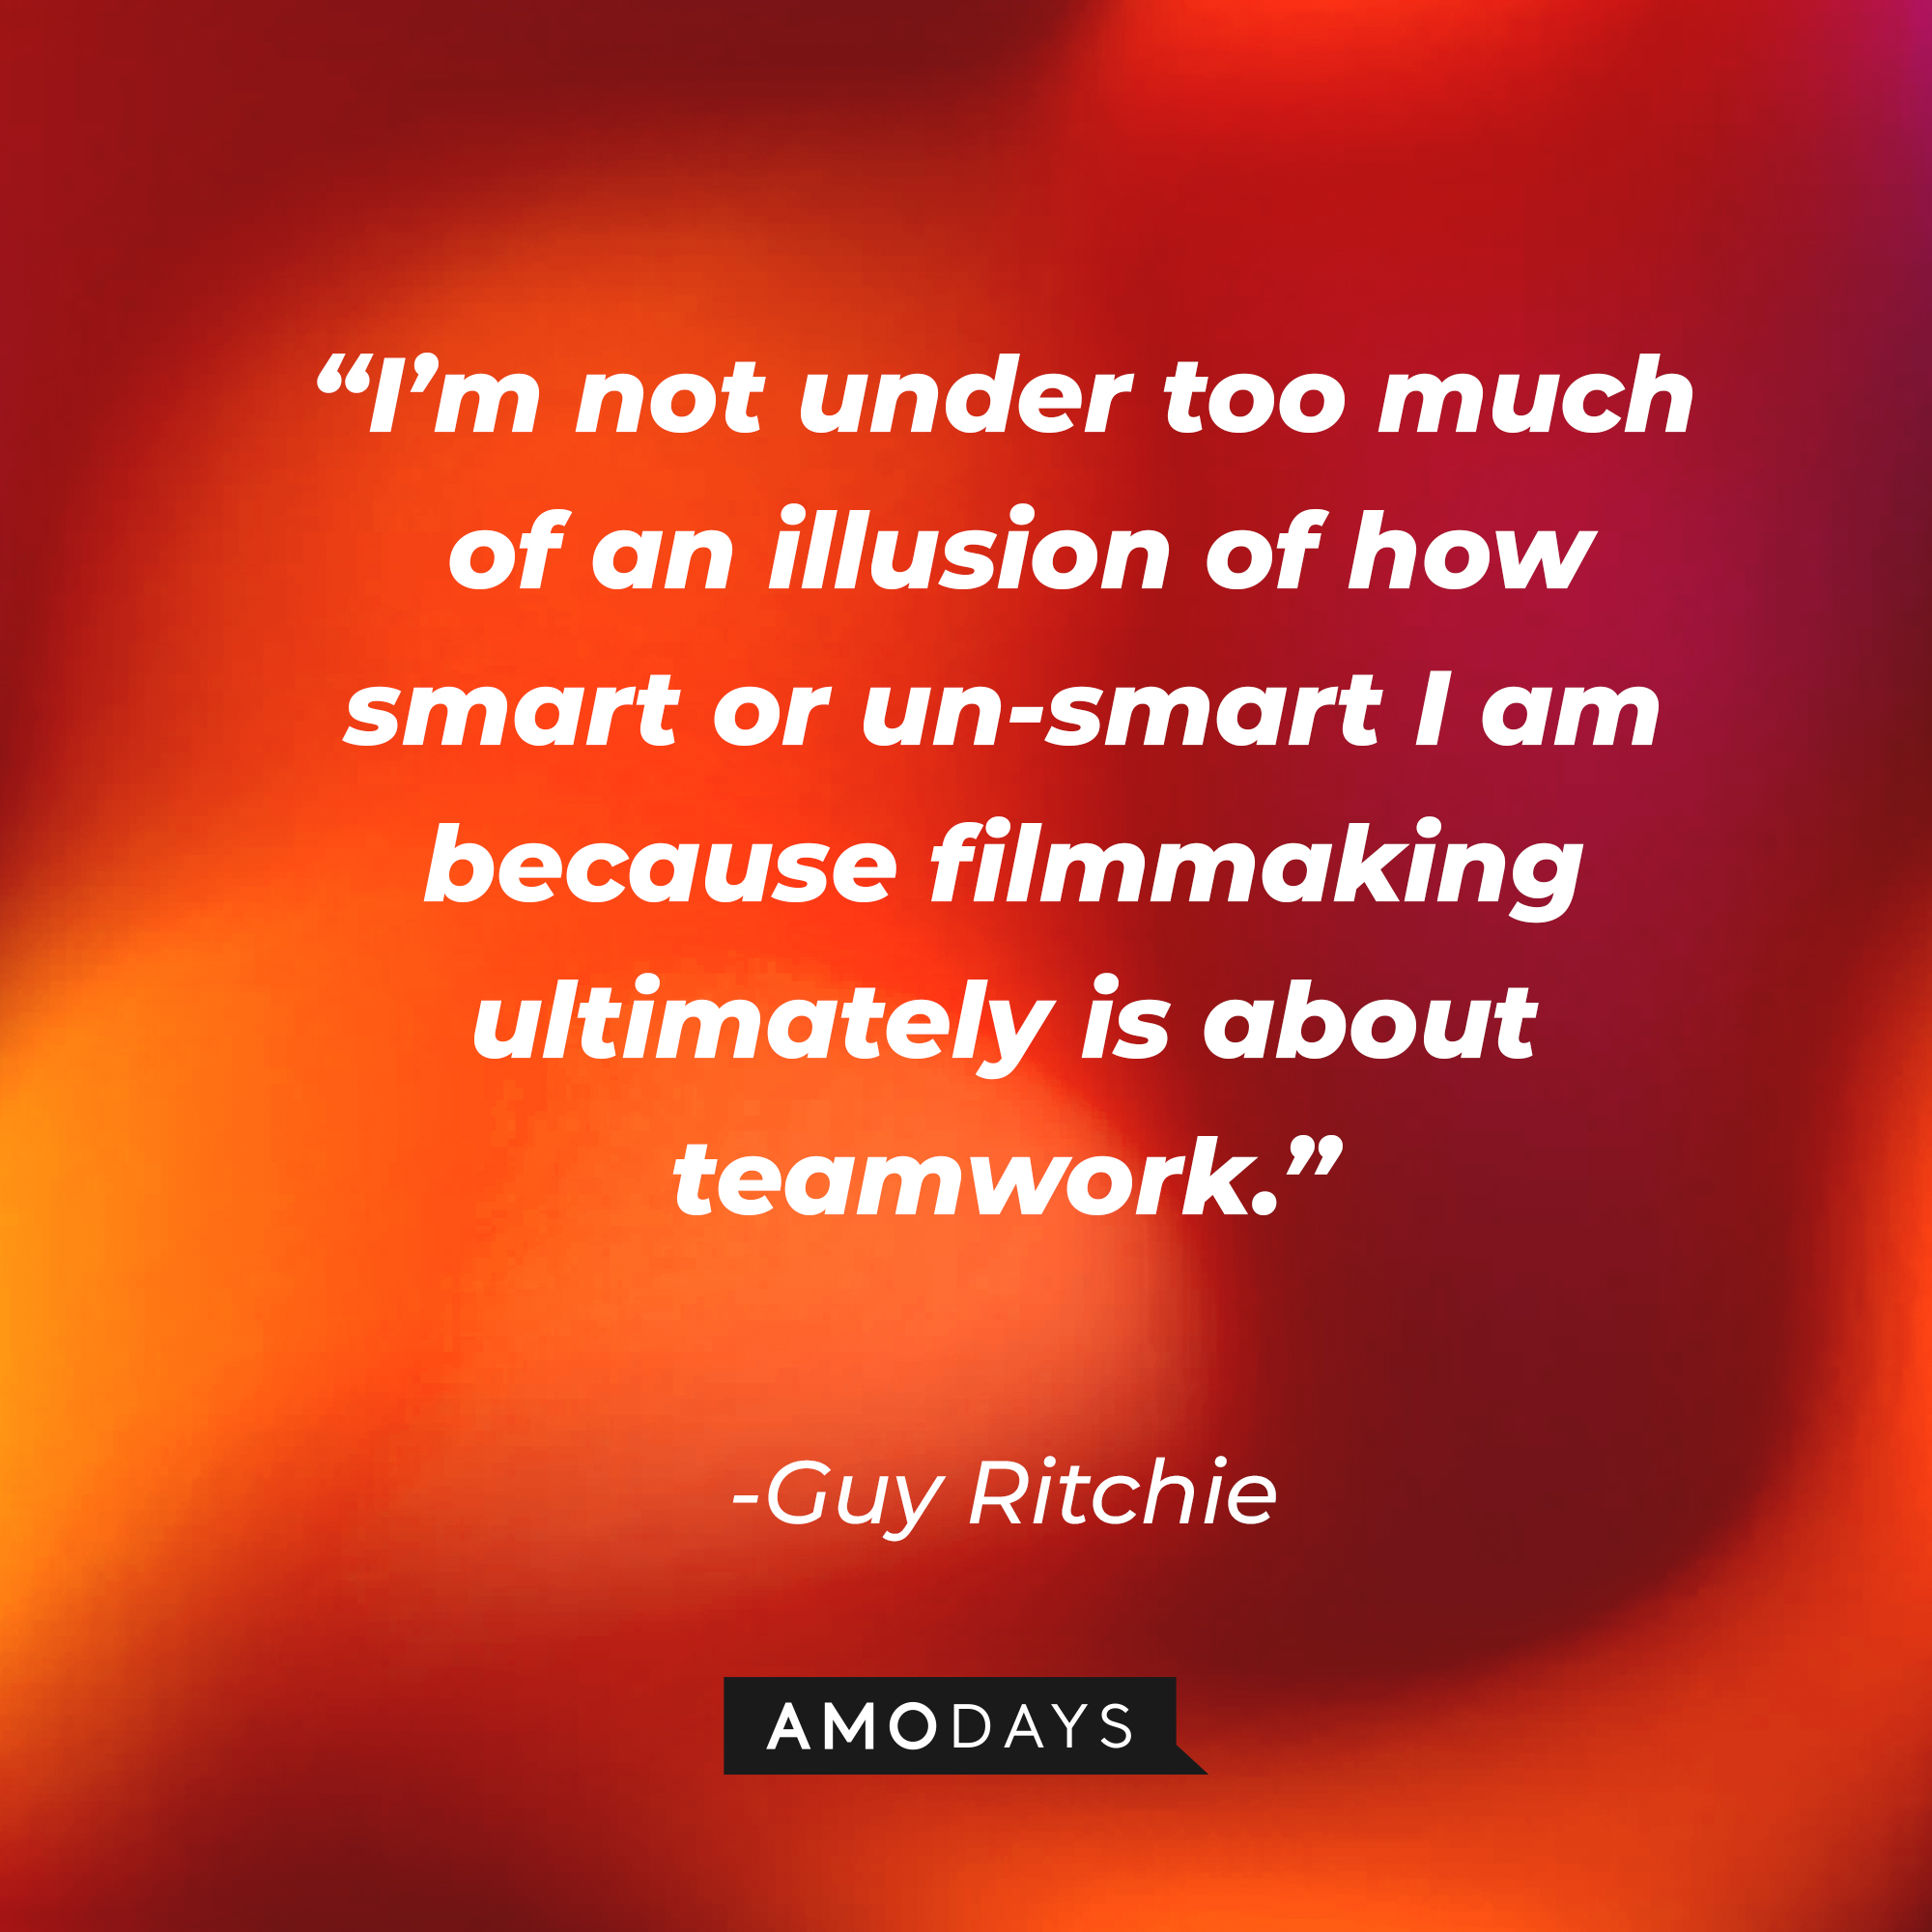 Guy Ritchie's quote, “I’m not under too much of an illusion of how smart or un-smart I am because filmmaking ultimately is about teamwork.” | Source: AmoDays